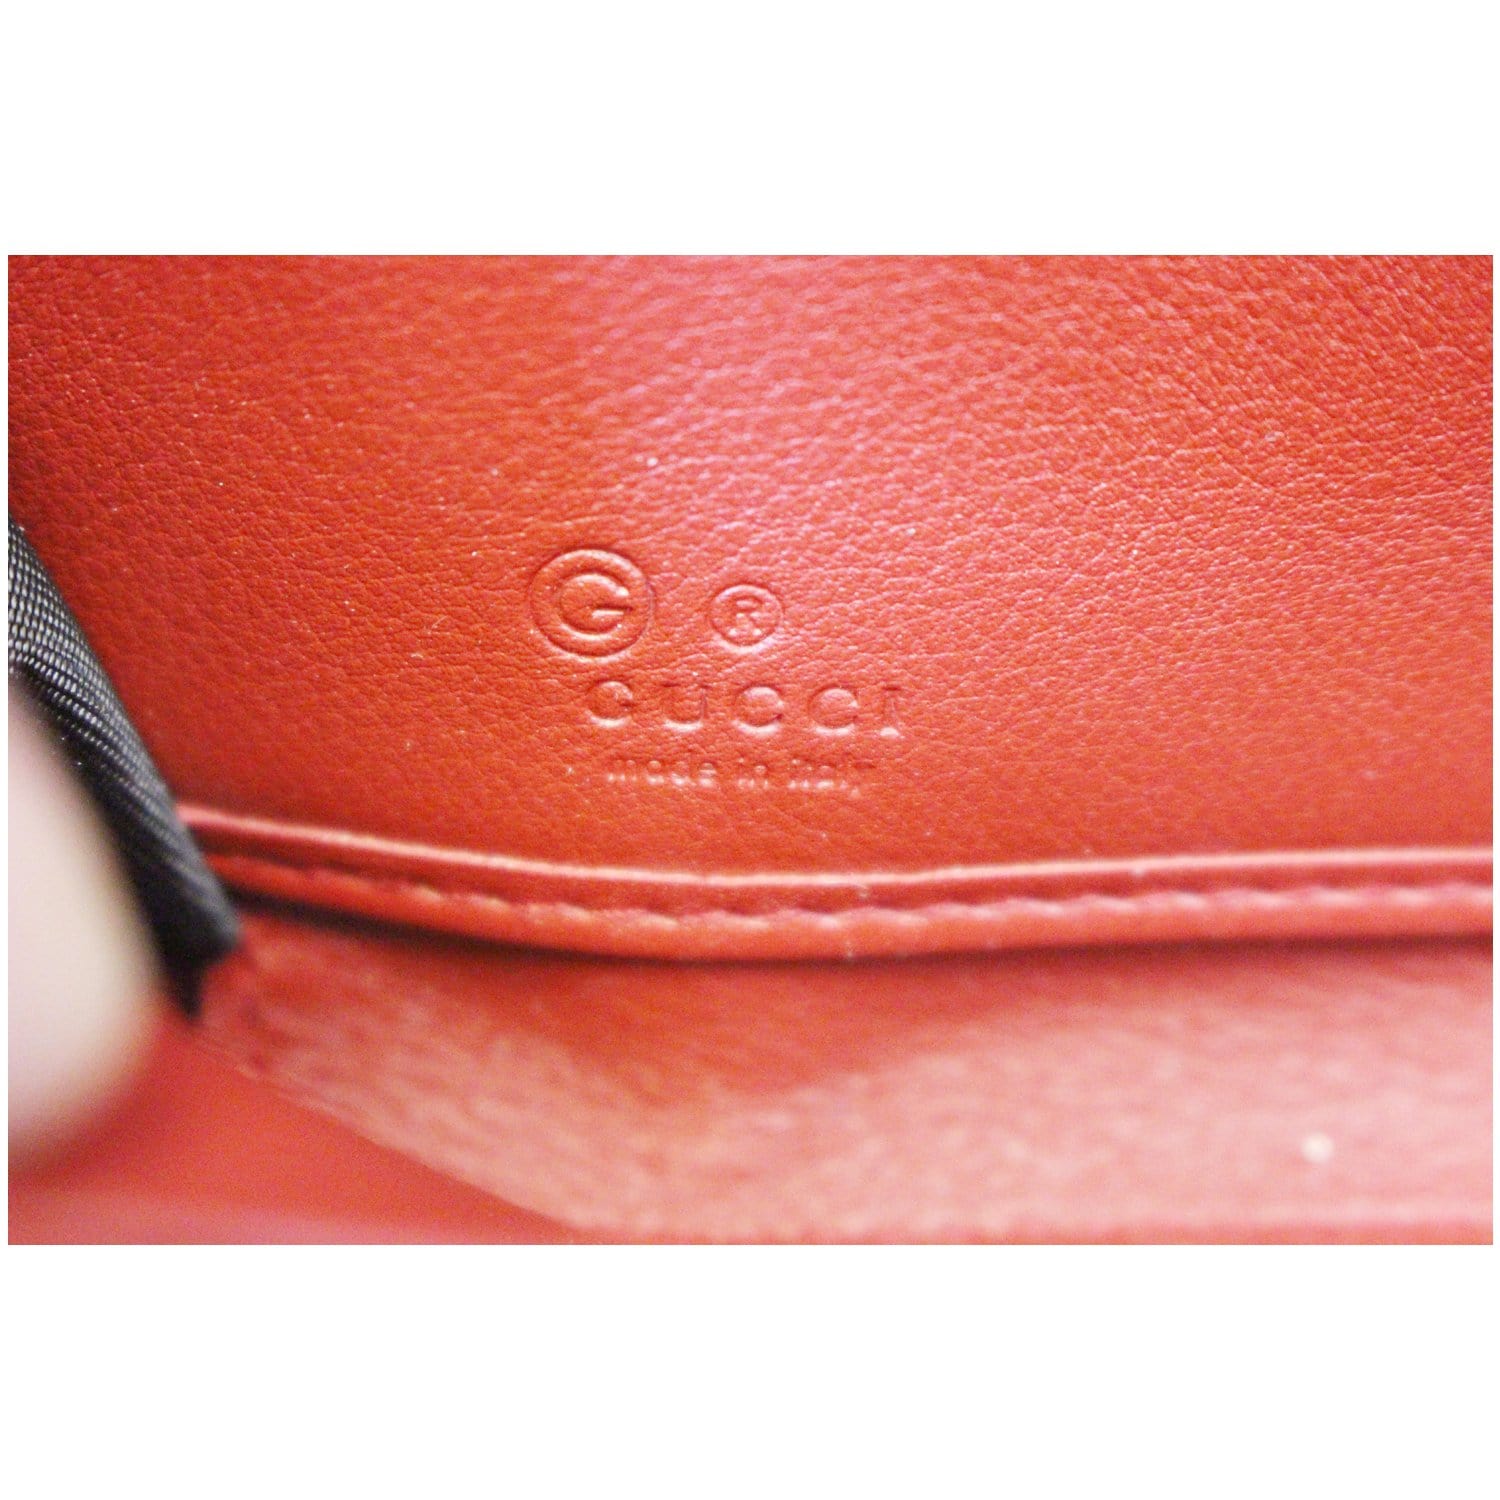 New Authentic Gucci 391465 Micro GG Leather XL Zip Around Travel